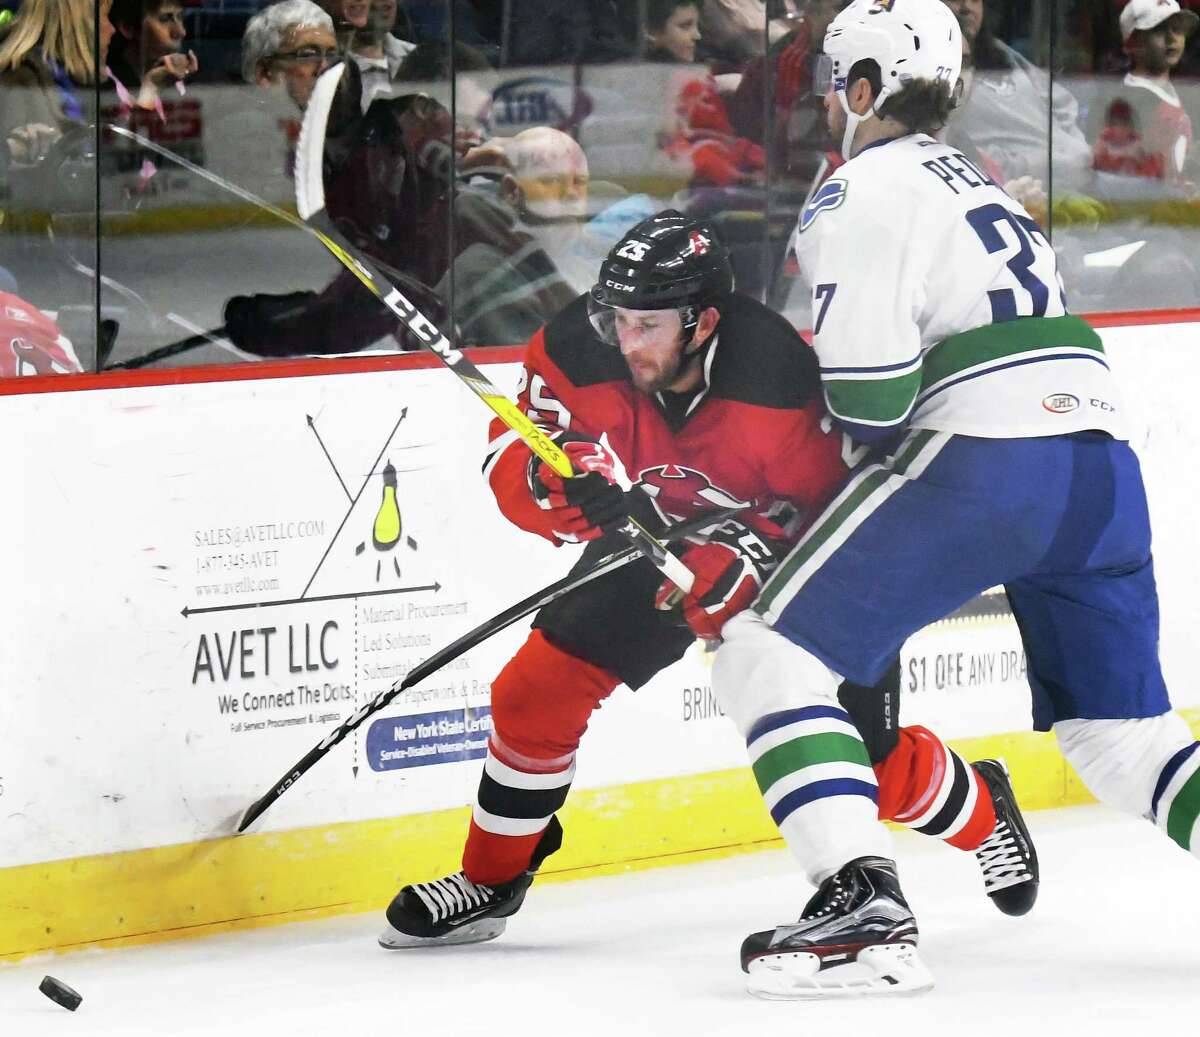 Albany Devils' #25 Nick Lappin, left, fights past Utica Comets' #37 Andrey Pedan during Friday's game at the Times Union Center March 24, 2017 in Albany, NY. (John Carl D'Annibale / Times Union)